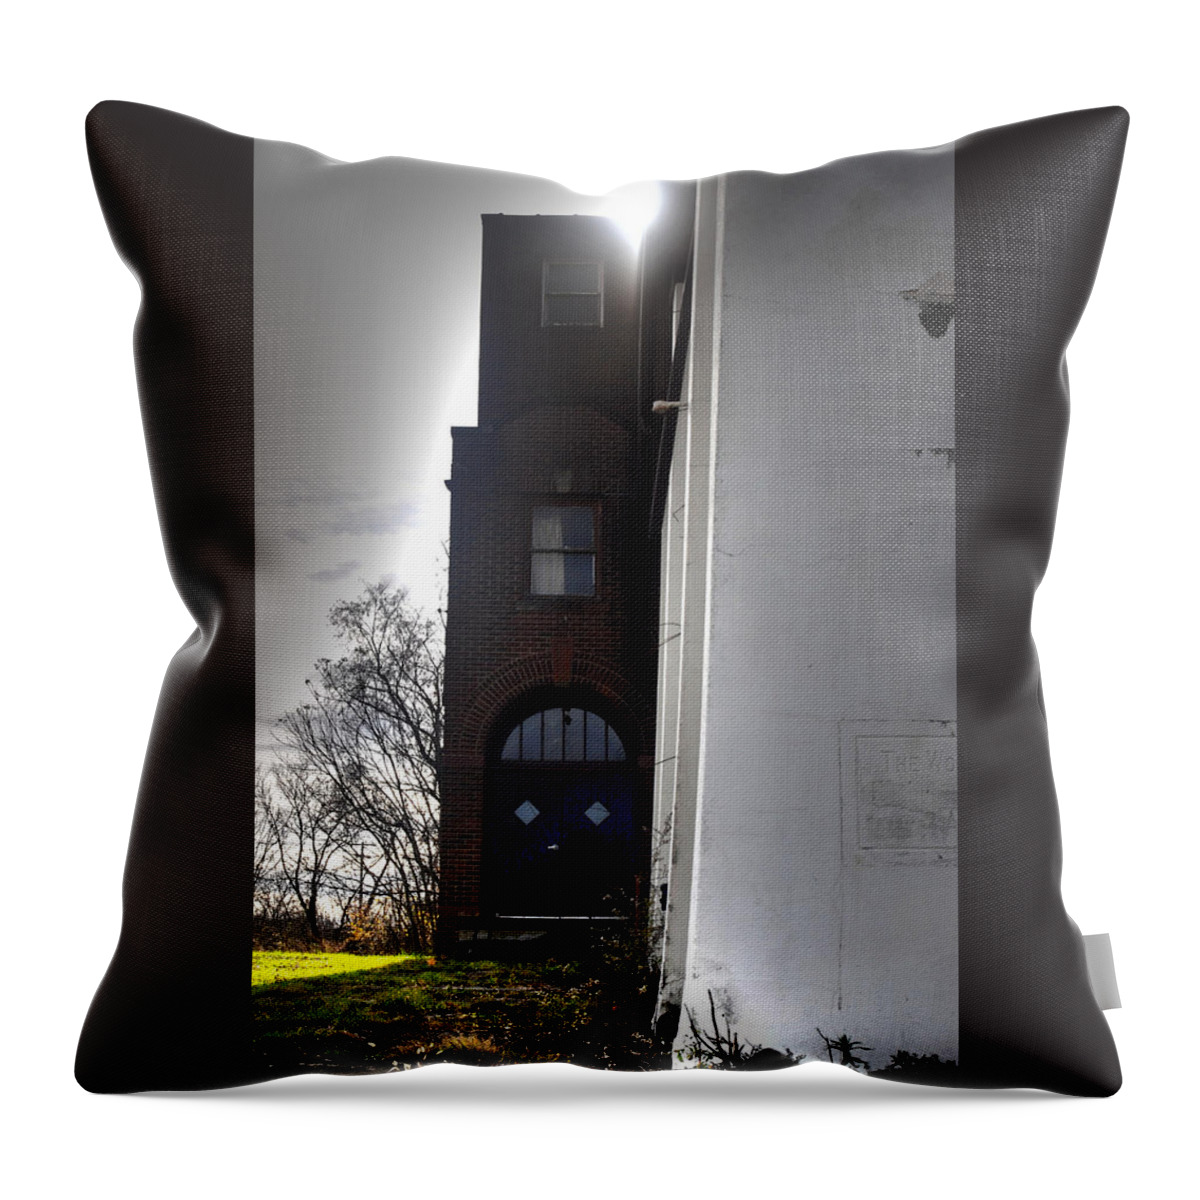  Throw Pillow featuring the photograph Darkened Door by Melissa Newcomb